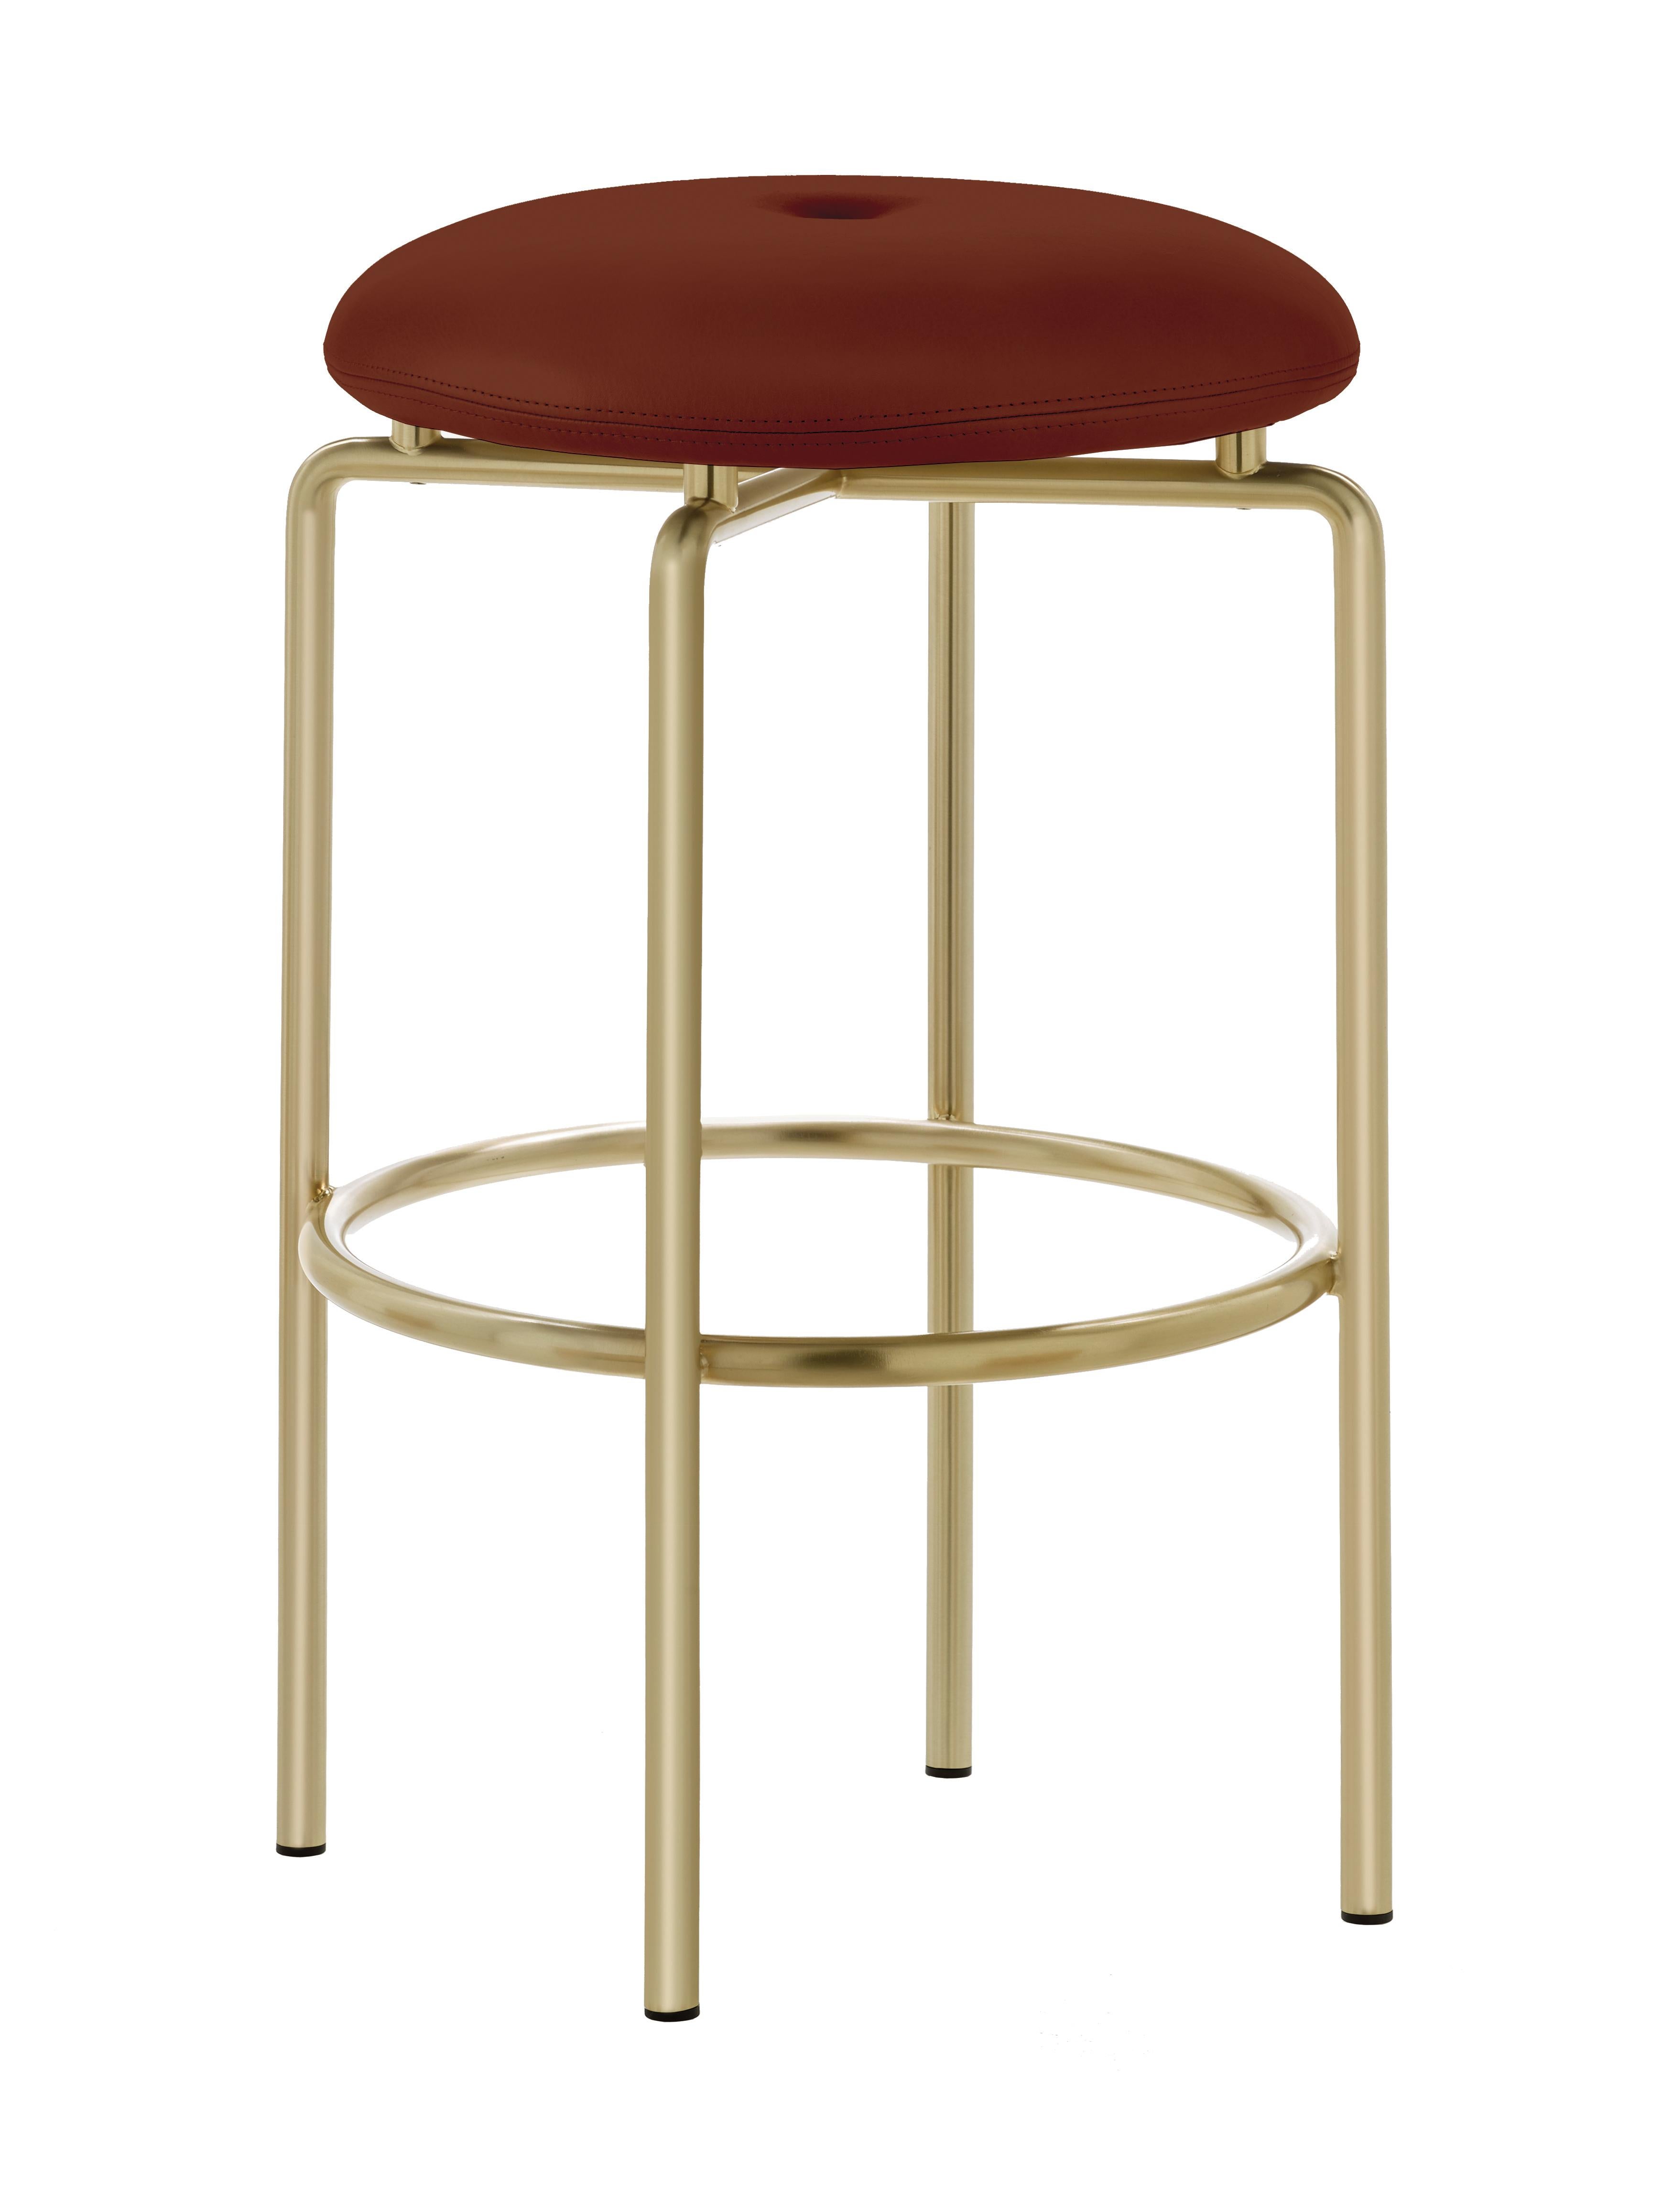 For Sale: Brown (Elegant 93718 Dark Cognac) Circular Counter Stool in Satin Brass and Leather Designed by Craig Bassam